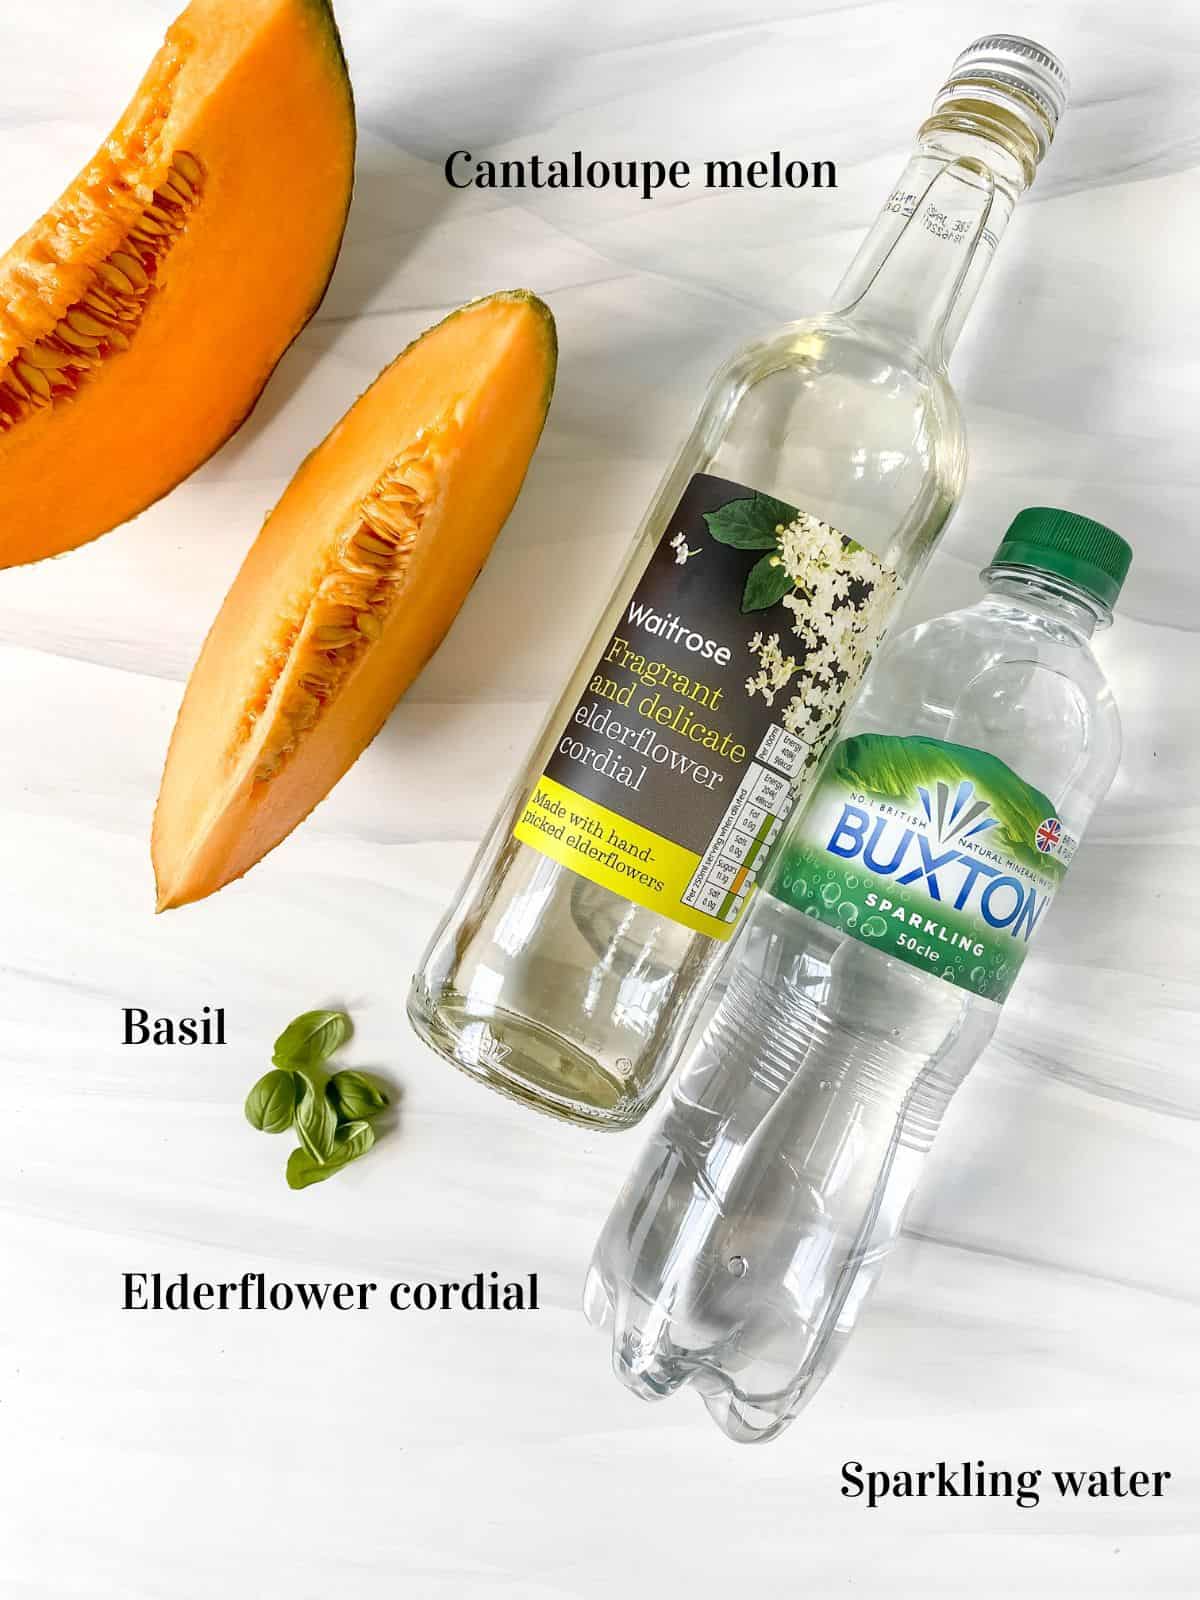 labelled ingredients to make cantaloupe mocktail including sparkling water and basil.